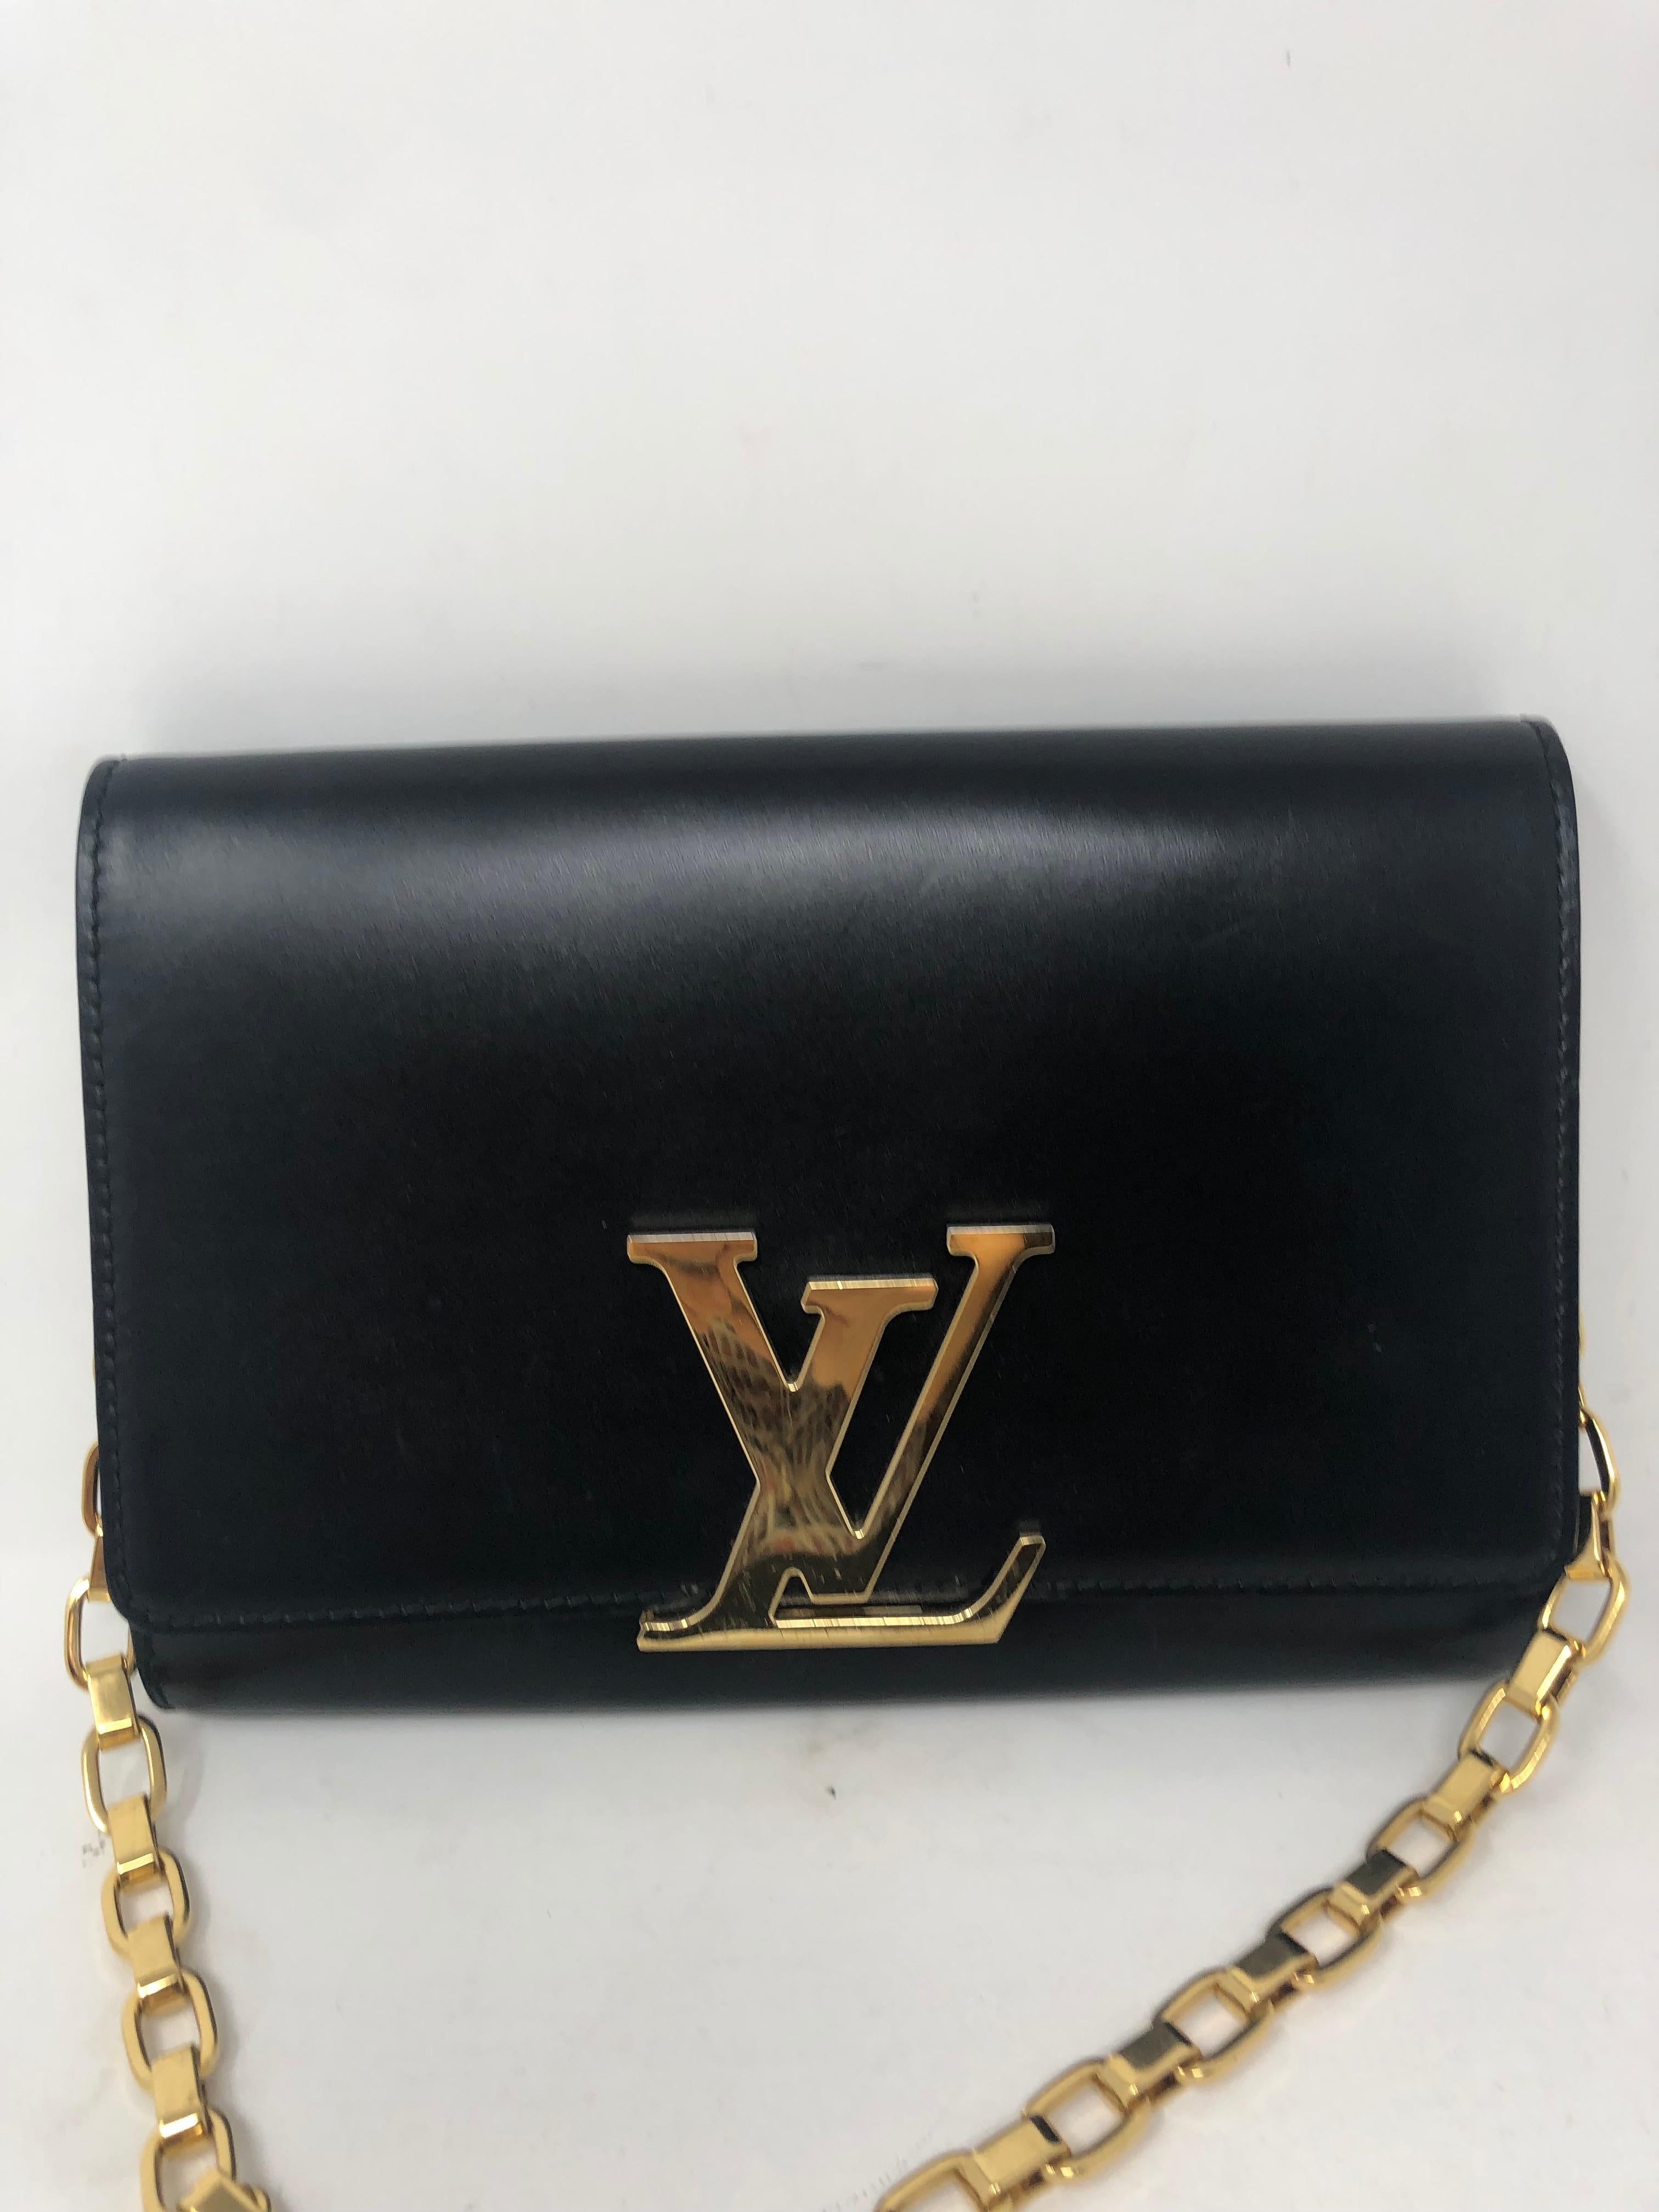 Louis Vuitton Chain Louise GM Black Bag. Black calfskin leather with LV gold hardware clasp and chain. Chain can be worn as a shoulder bag or tucked in as a clutch. Good condition. Light surface scratches on the hardware. Minimal wear.  Leather is